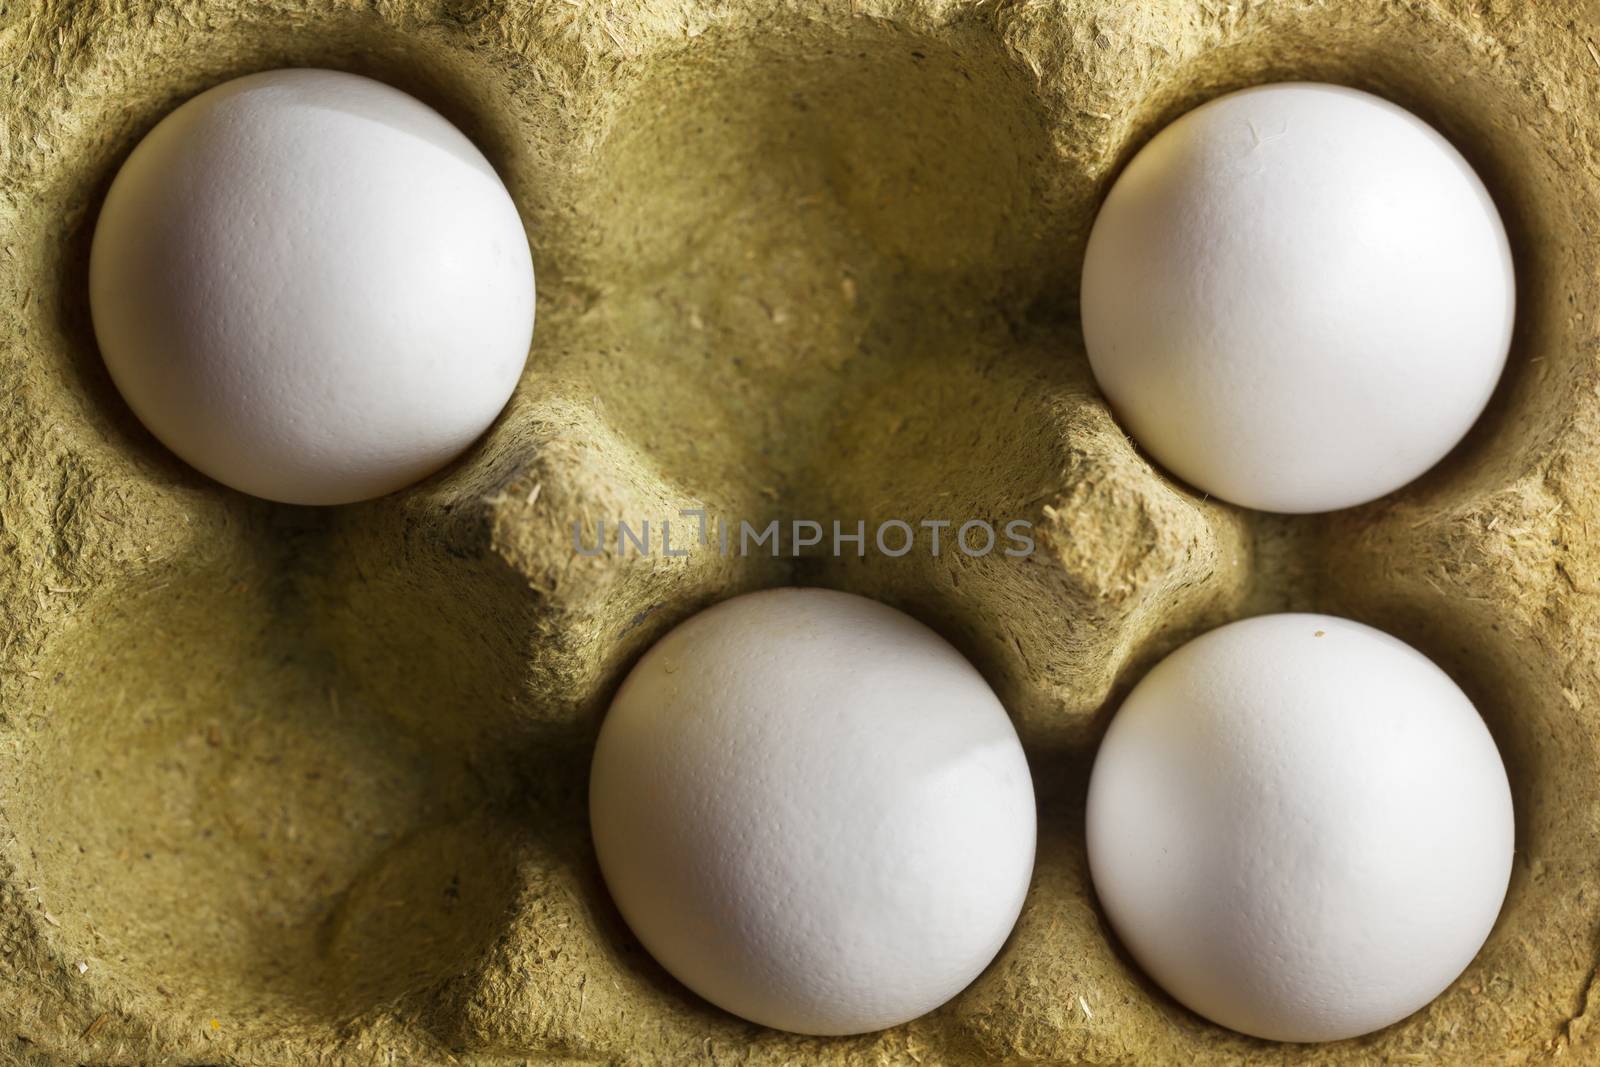 Four organic eggs in a box made of grass by kievith